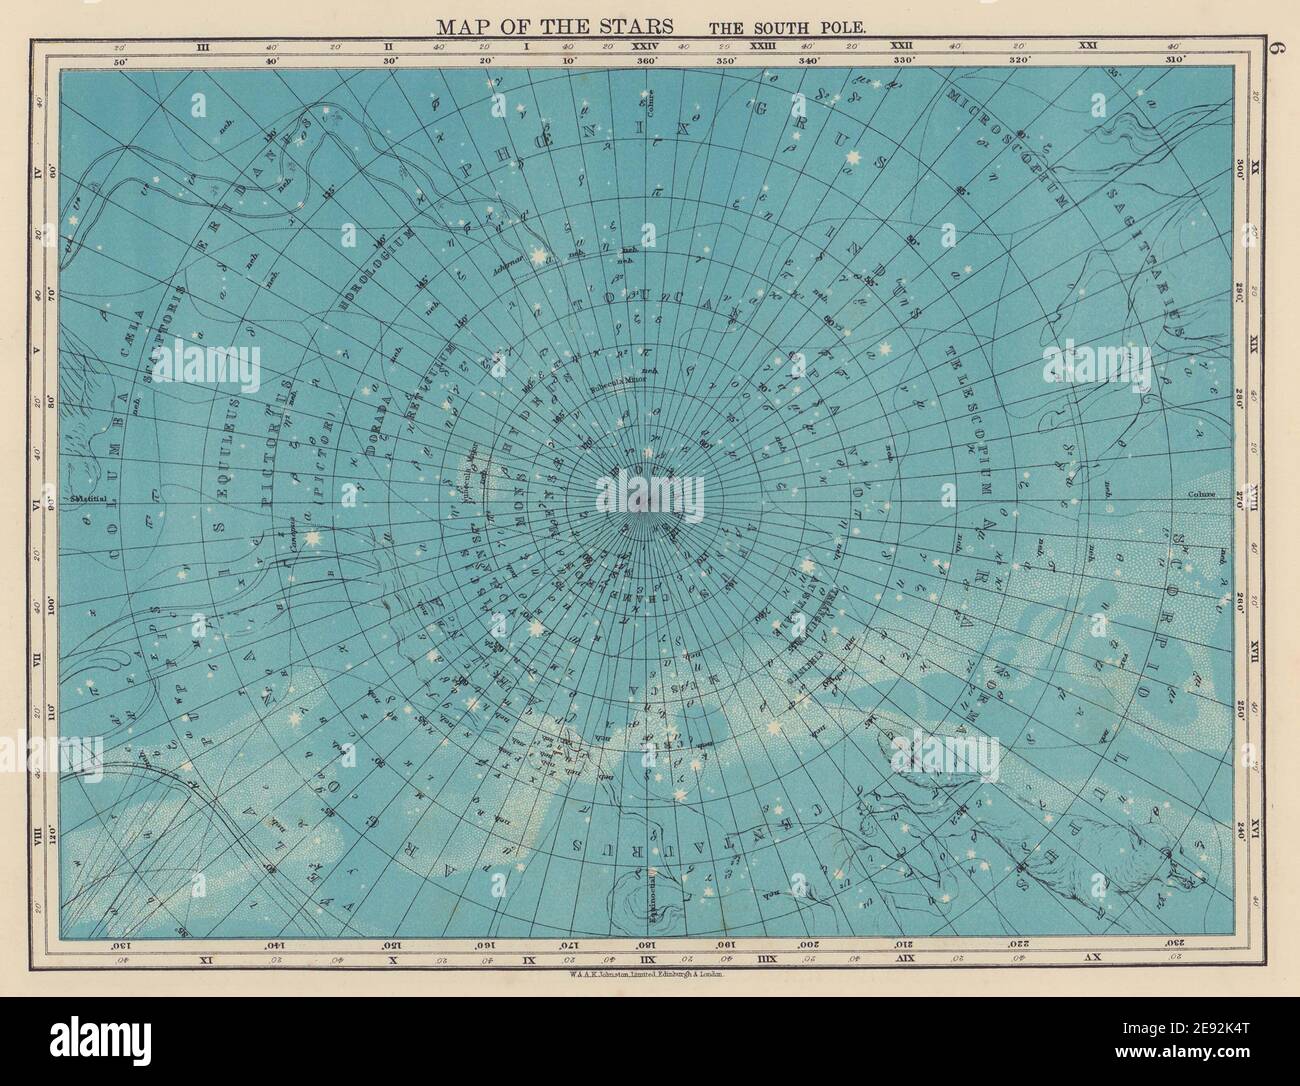 ASTRONOMY. Map of the Stars. The South Pole. Constellations. JOHNSTON 1901 Stock Photo